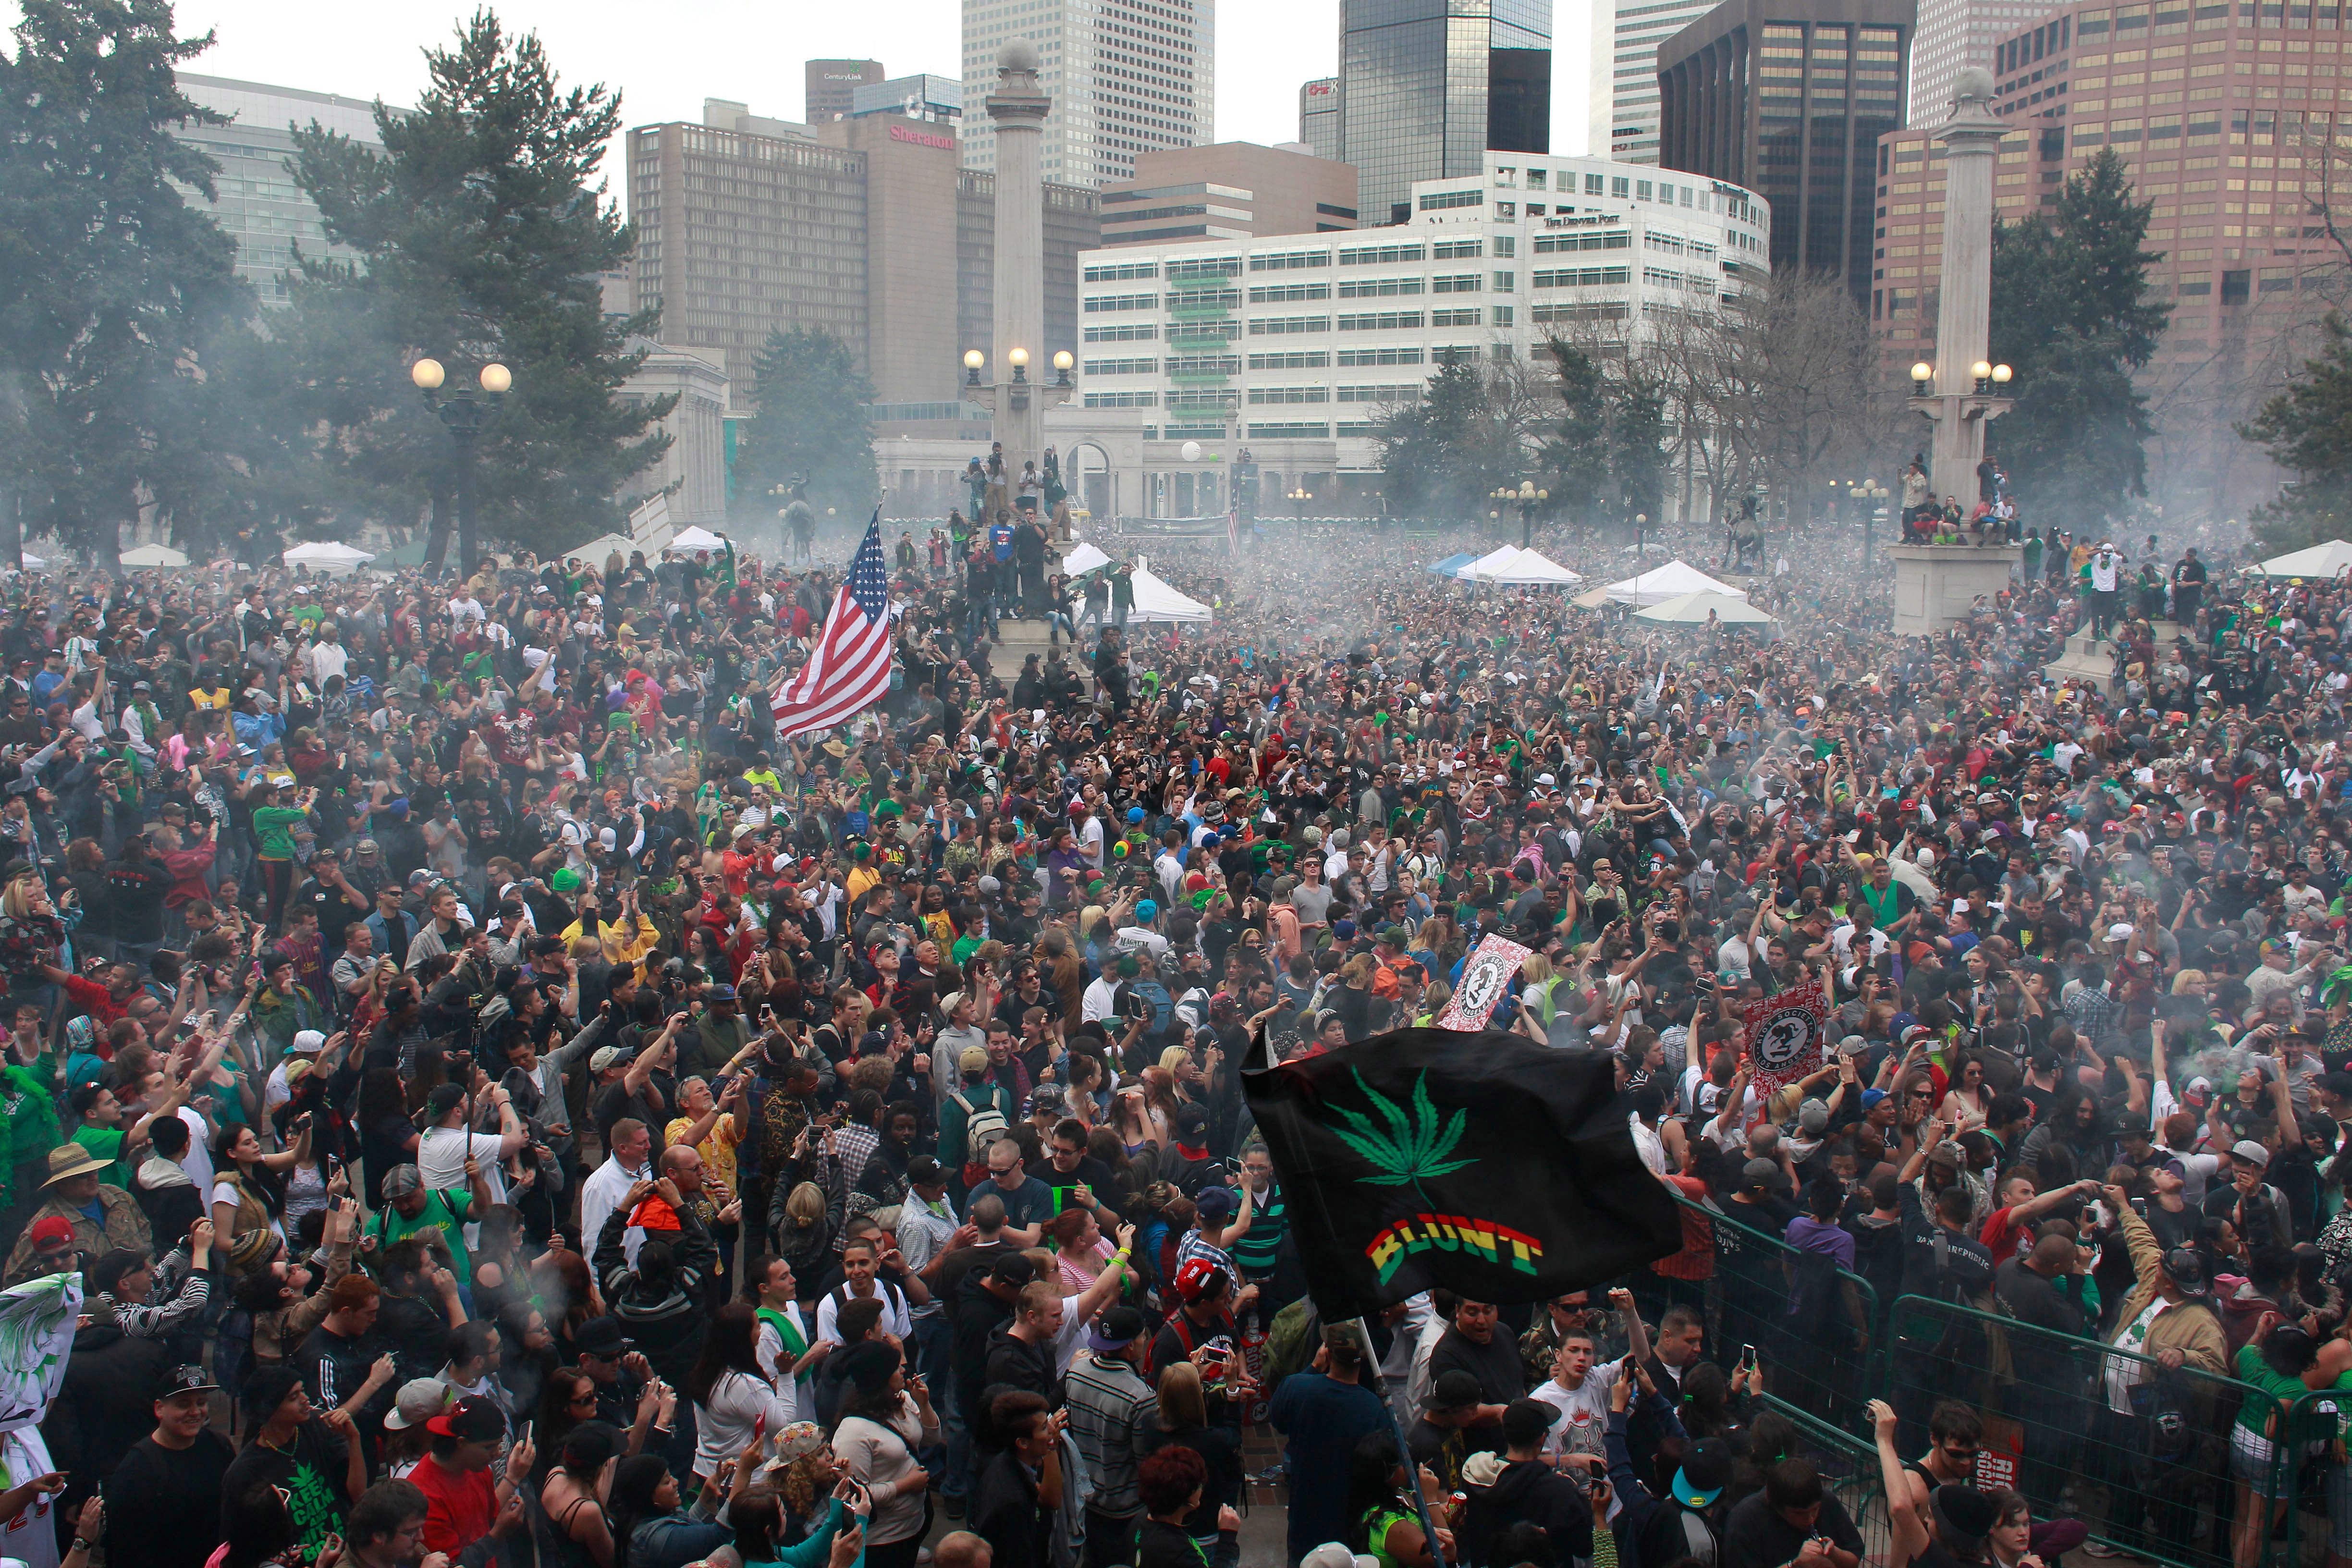 Members of a crowd numbering tens of thousands smoke marijuana and listen to live music at the Denver 420 pro-marijuana rally at Civic Center Park in Denver on 20 April 2013